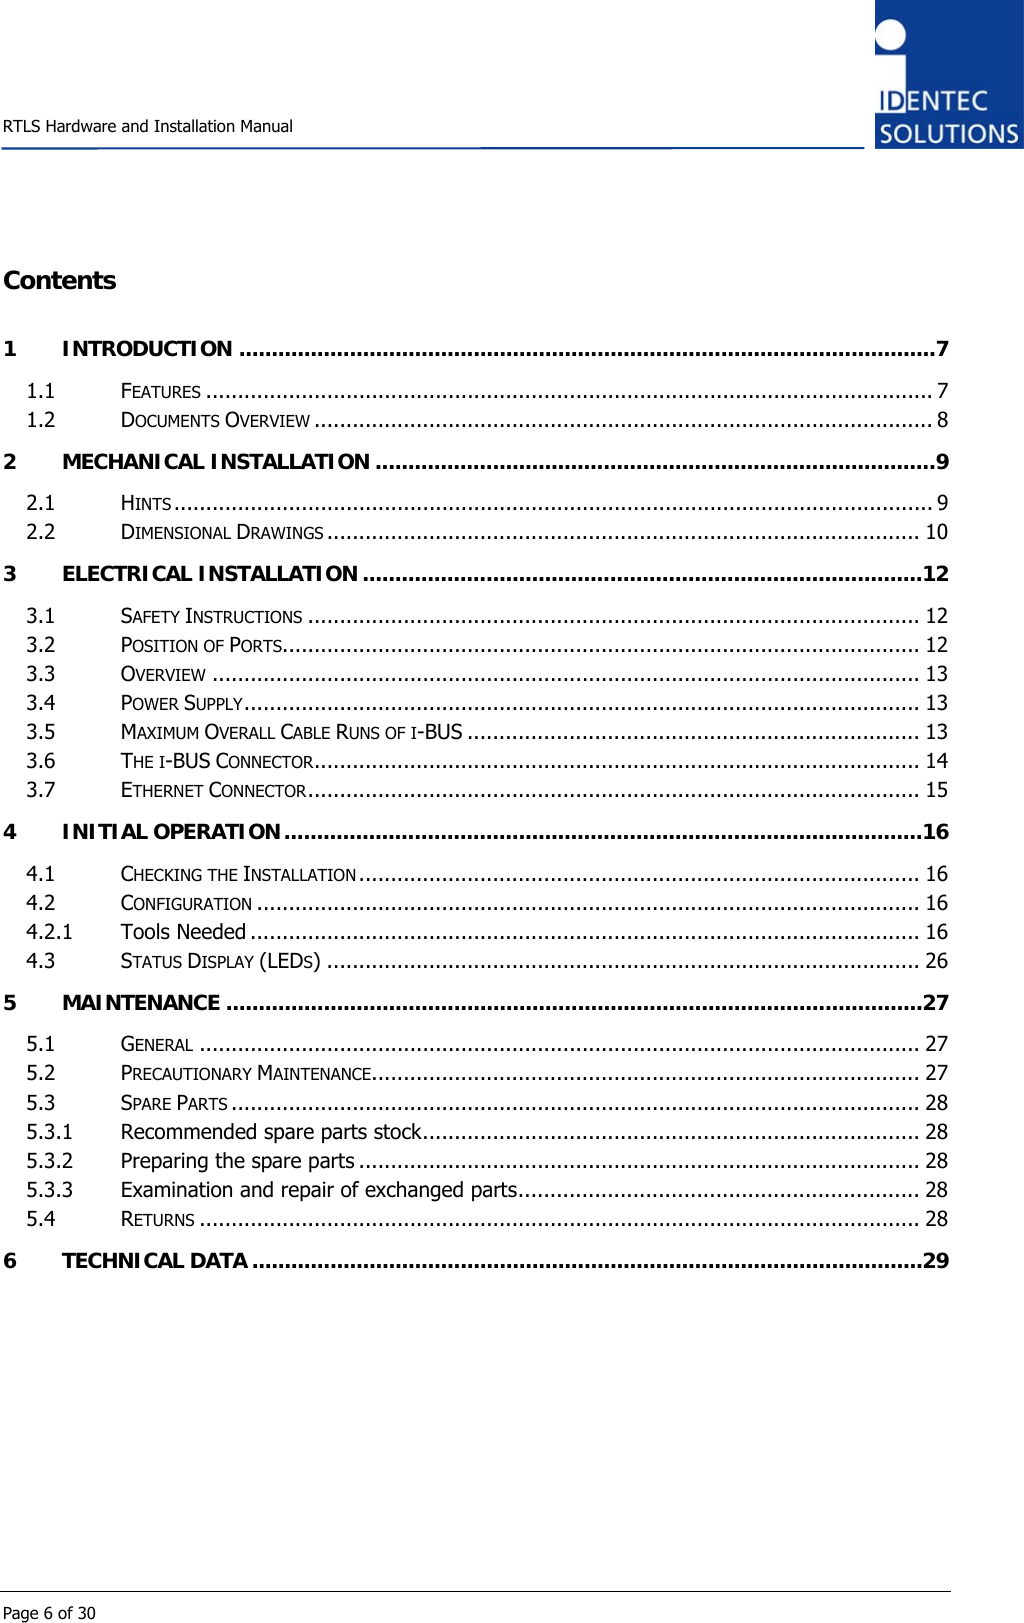    RTLS Hardware and Installation Manual  Page 6 of 30 Contents 1 INTRODUCTION ...........................................................................................................7 1.1 FEATURES .................................................................................................................. 7 1.2 DOCUMENTS OVERVIEW ................................................................................................. 8 2 MECHANICAL INSTALLATION ......................................................................................9 2.1 HINTS ....................................................................................................................... 9 2.2 DIMENSIONAL DRAWINGS ............................................................................................. 10 3 ELECTRICAL INSTALLATION ......................................................................................12 3.1 SAFETY INSTRUCTIONS ................................................................................................ 12 3.2 POSITION OF PORTS.................................................................................................... 12 3.3 OVERVIEW ............................................................................................................... 13 3.4 POWER SUPPLY.......................................................................................................... 13 3.5 MAXIMUM OVERALL CABLE RUNS OF I-BUS ....................................................................... 13 3.6 THE I-BUS CONNECTOR............................................................................................... 14 3.7 ETHERNET CONNECTOR................................................................................................ 15 4 INITIAL OPERATION..................................................................................................16 4.1 CHECKING THE INSTALLATION ........................................................................................ 16 4.2 CONFIGURATION ........................................................................................................ 16 4.2.1 Tools Needed ......................................................................................................... 16 4.3 STATUS DISPLAY (LEDS) ............................................................................................. 26 5 MAINTENANCE ...........................................................................................................27 5.1 GENERAL ................................................................................................................. 27 5.2 PRECAUTIONARY MAINTENANCE...................................................................................... 27 5.3 SPARE PARTS ............................................................................................................ 28 5.3.1 Recommended spare parts stock.............................................................................. 28 5.3.2 Preparing the spare parts ........................................................................................ 28 5.3.3 Examination and repair of exchanged parts............................................................... 28 5.4 RETURNS ................................................................................................................. 28 6 TECHNICAL DATA .......................................................................................................29    